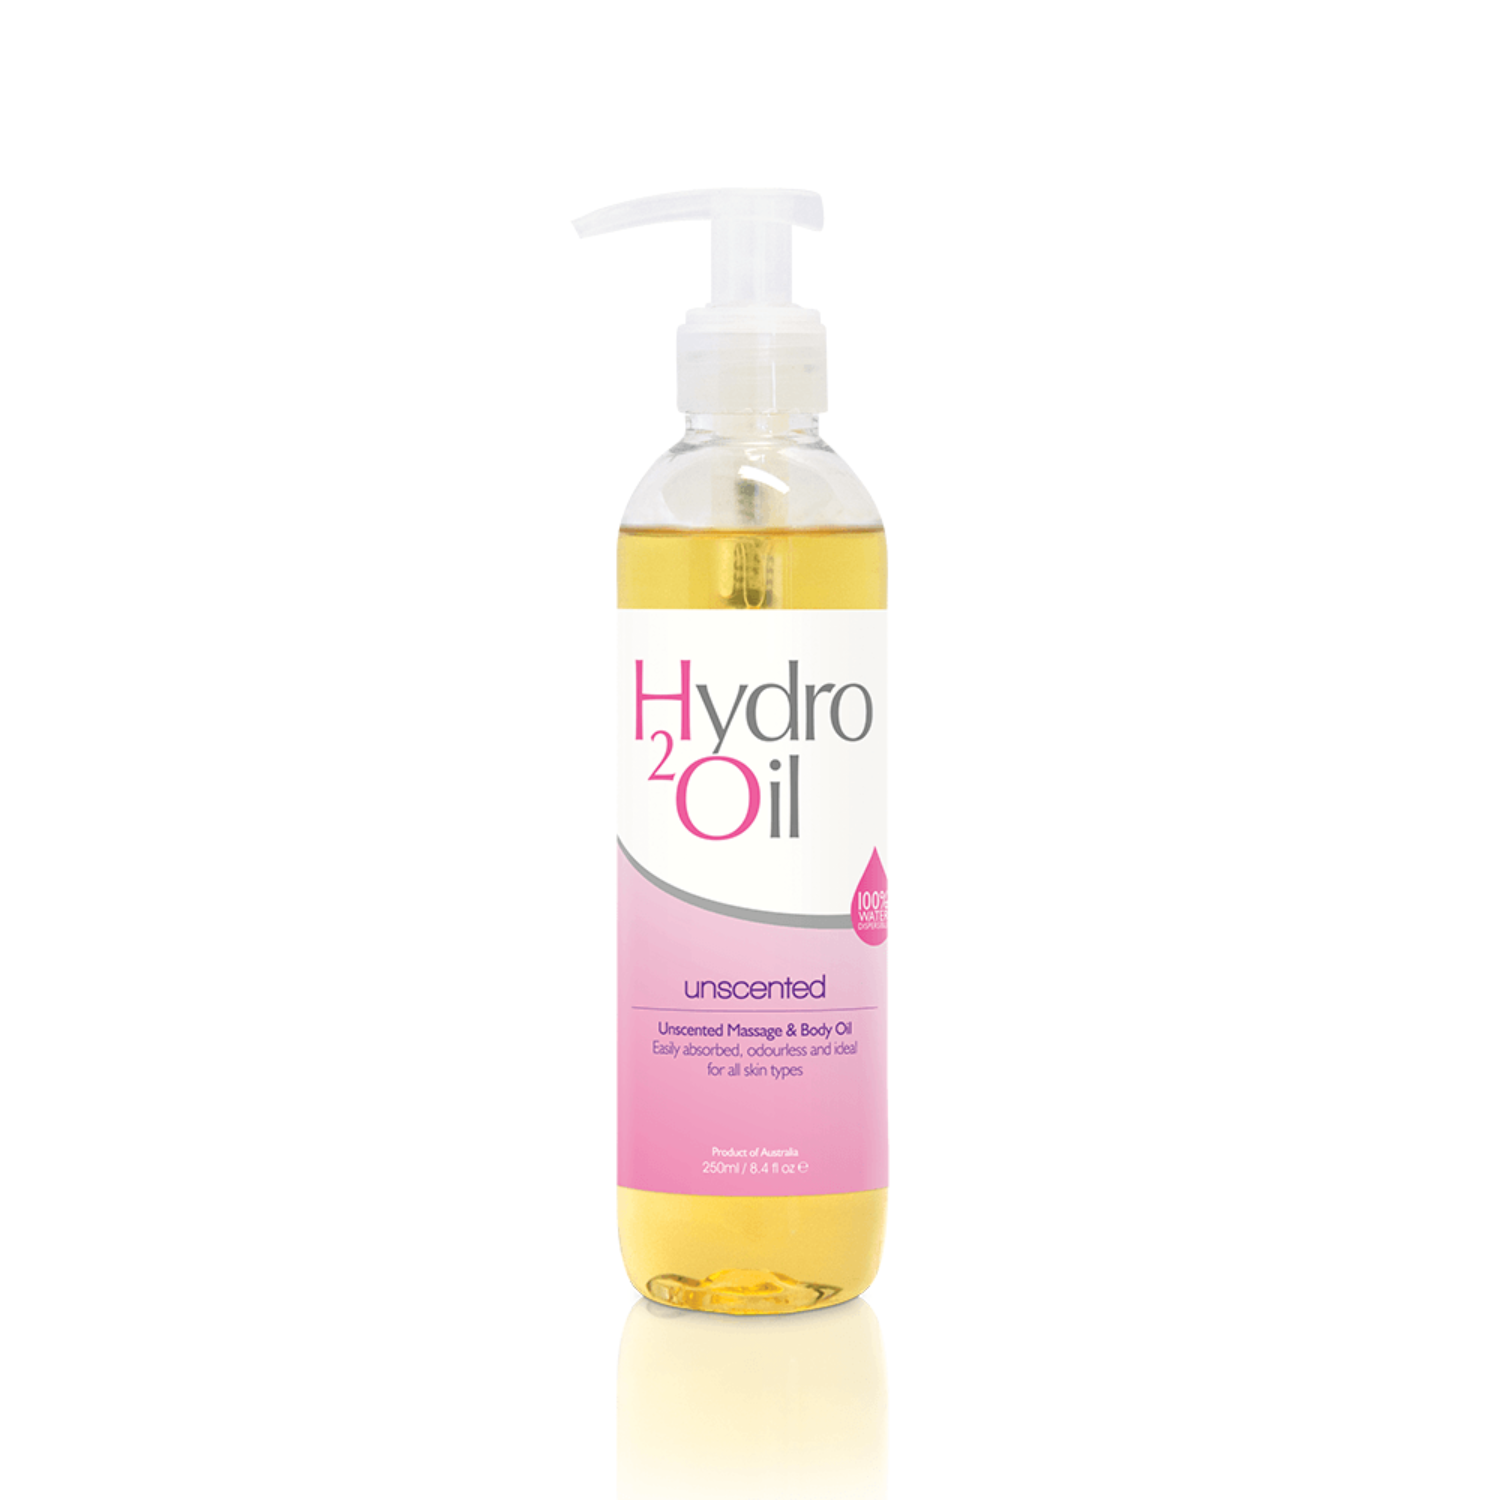 HYDRO OIL - UNSCENTED